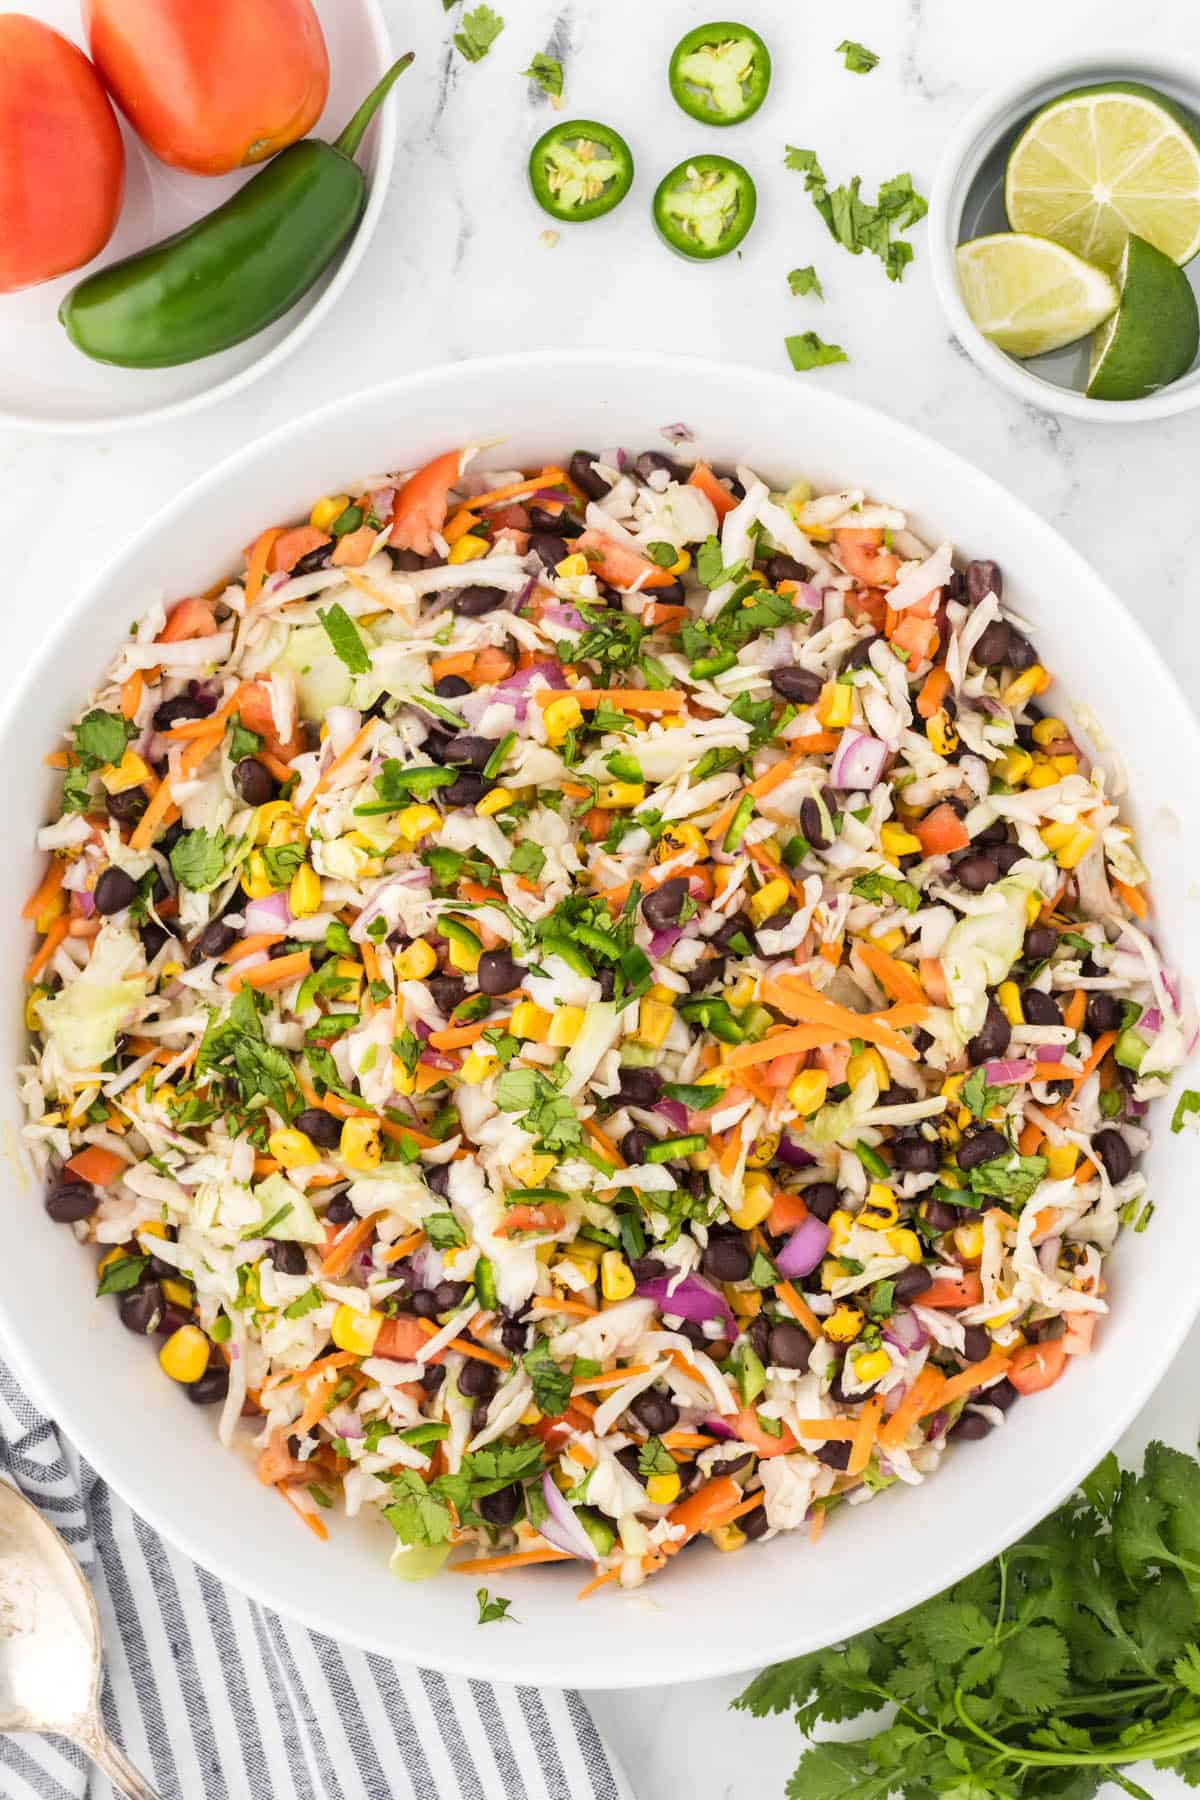 Crunchy Mexican style coleslaw in a large white bowl.